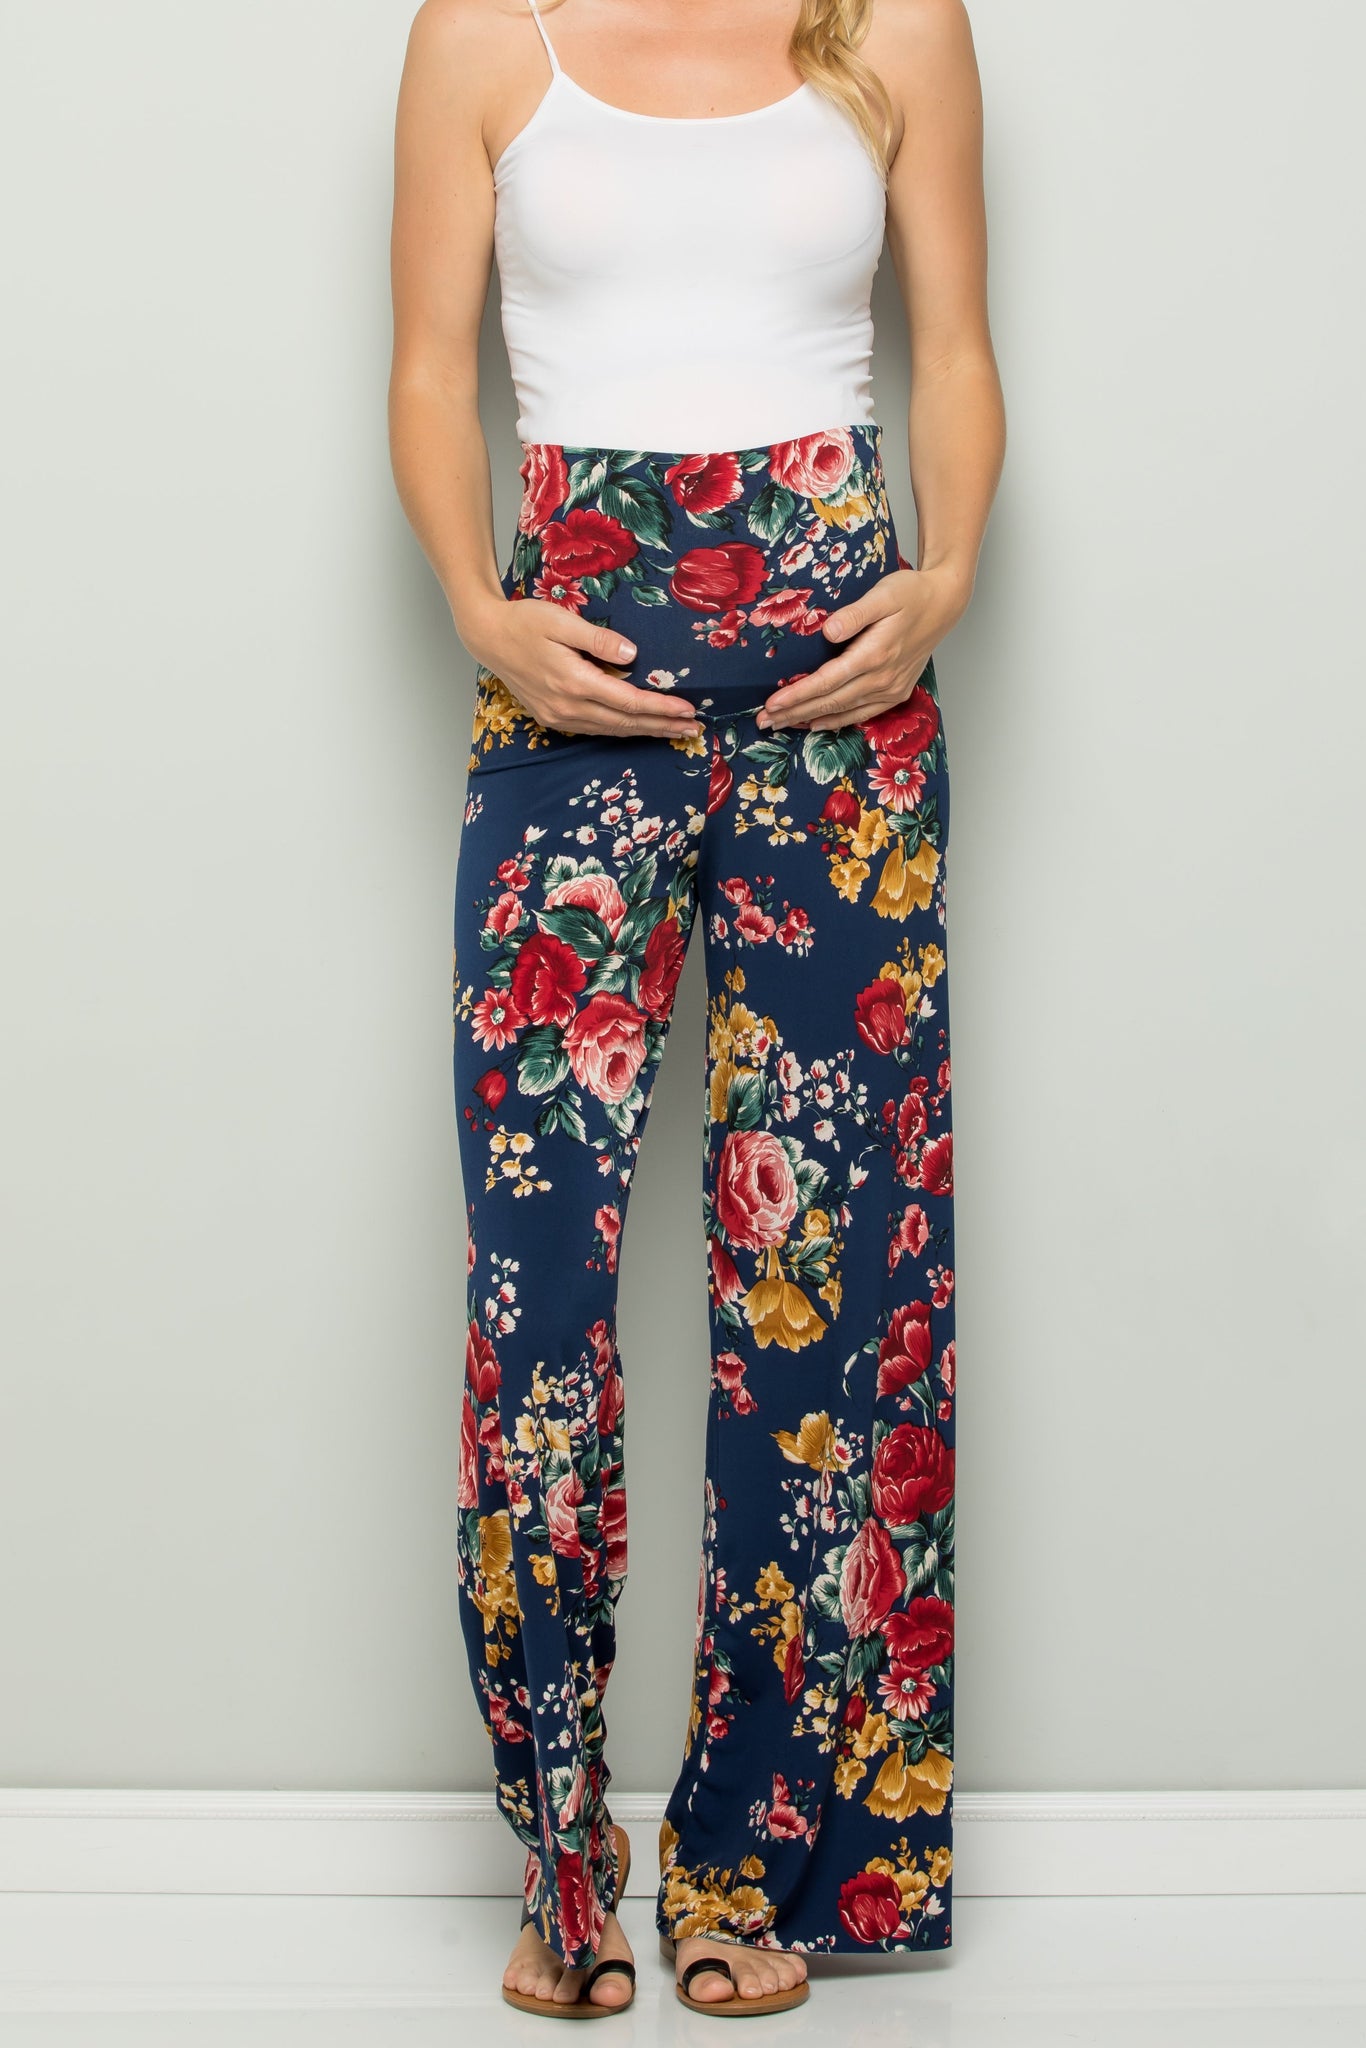 My Bump Floral Wide Leg Fold Over High Waisted Lounge Palazzo Maternity  Pants